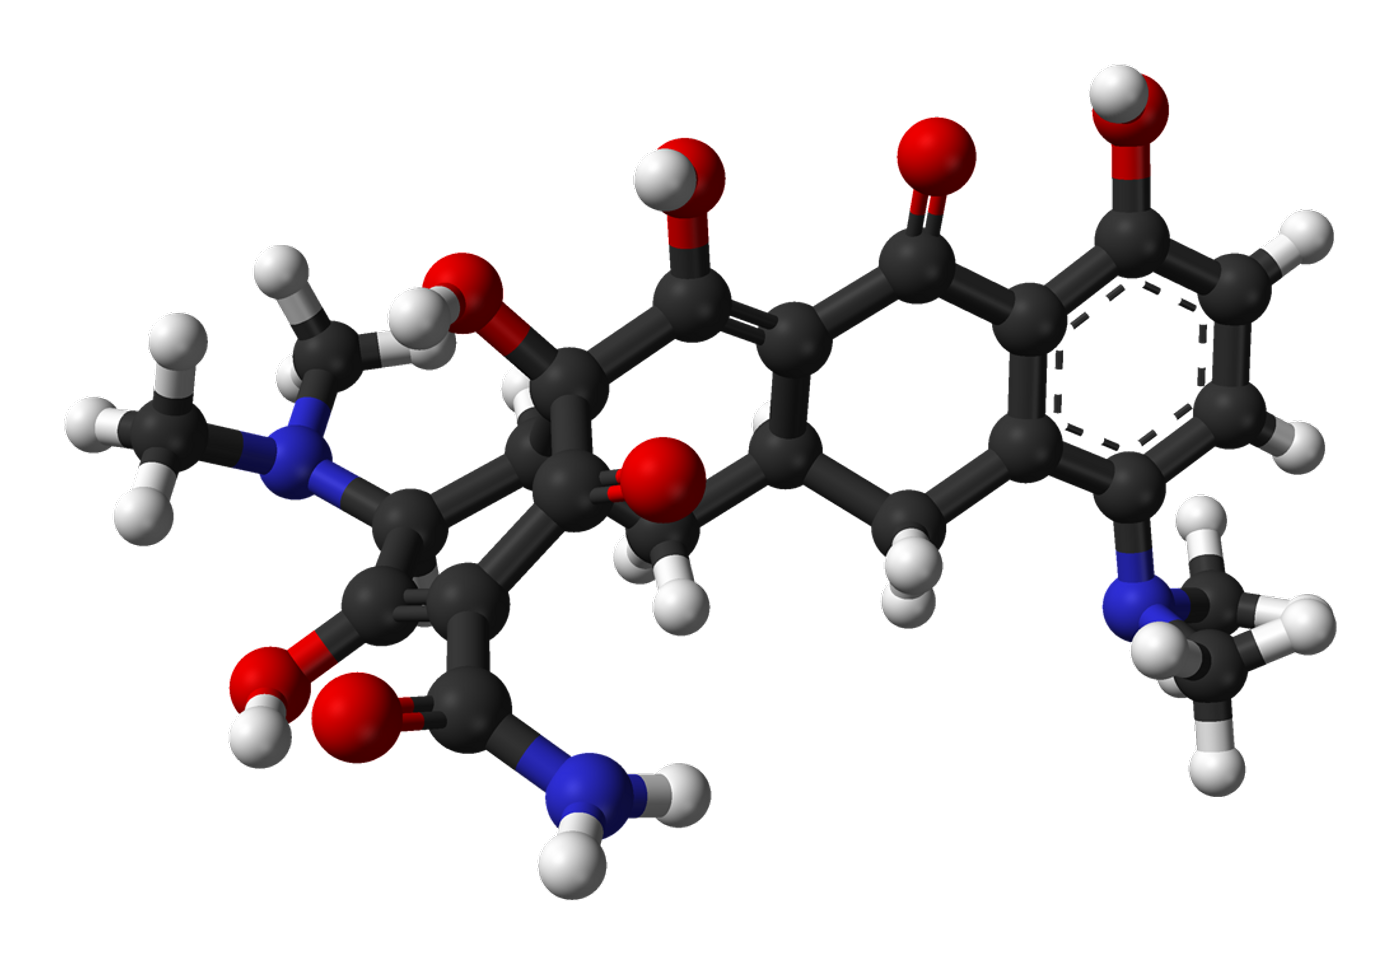 Ball-and-stick model of the minocycline molecule, C23H27N3O7. 